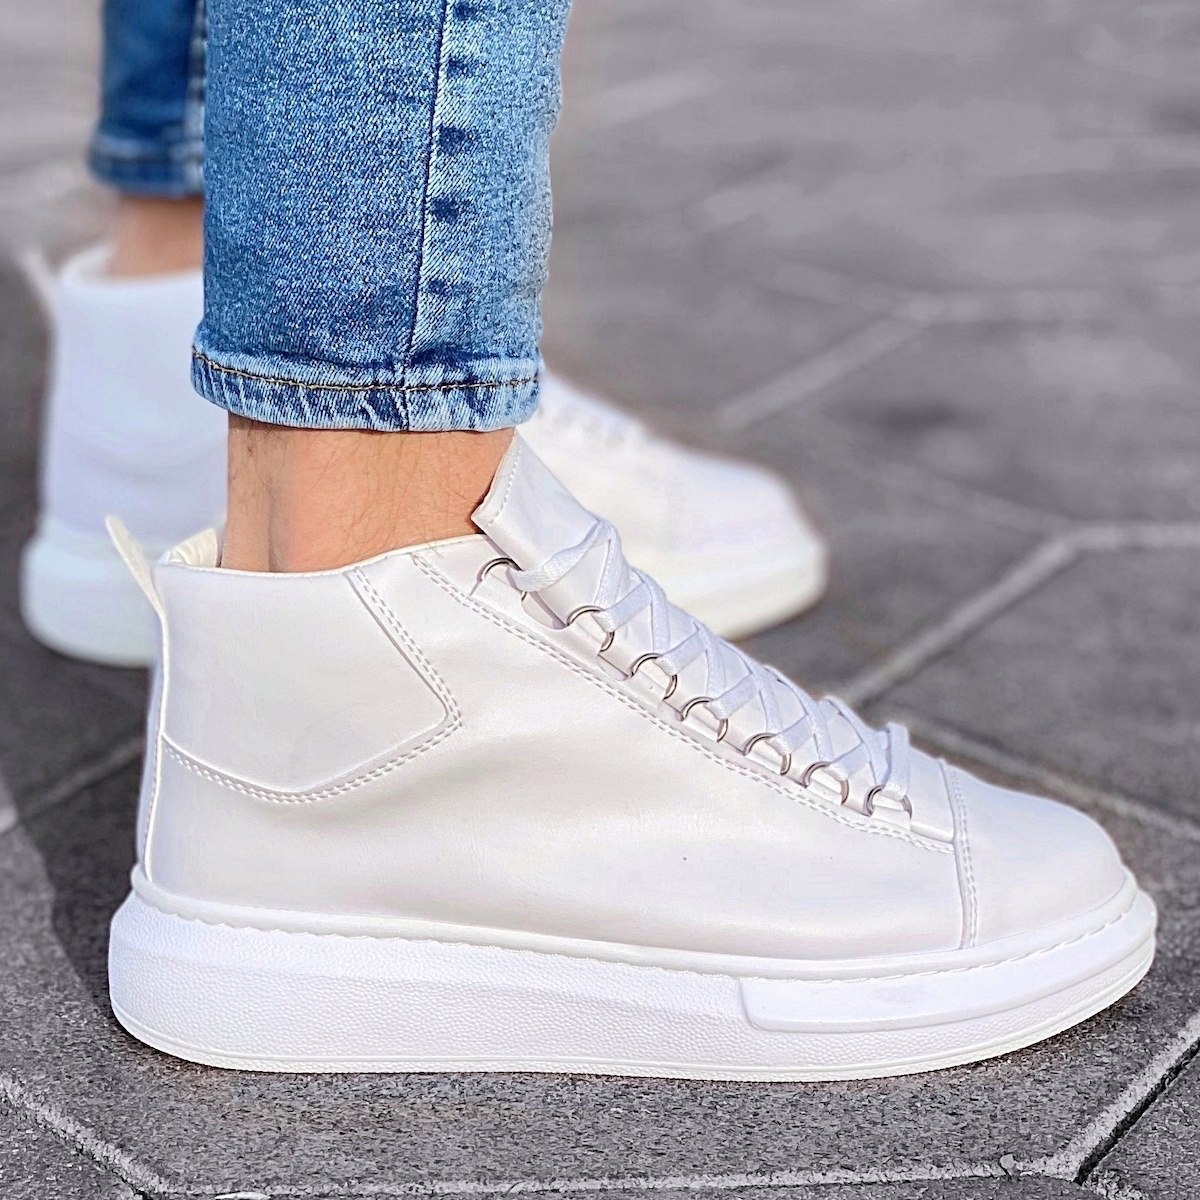 Hype Sole Mox High Top Sneakers in White | Martin Valen